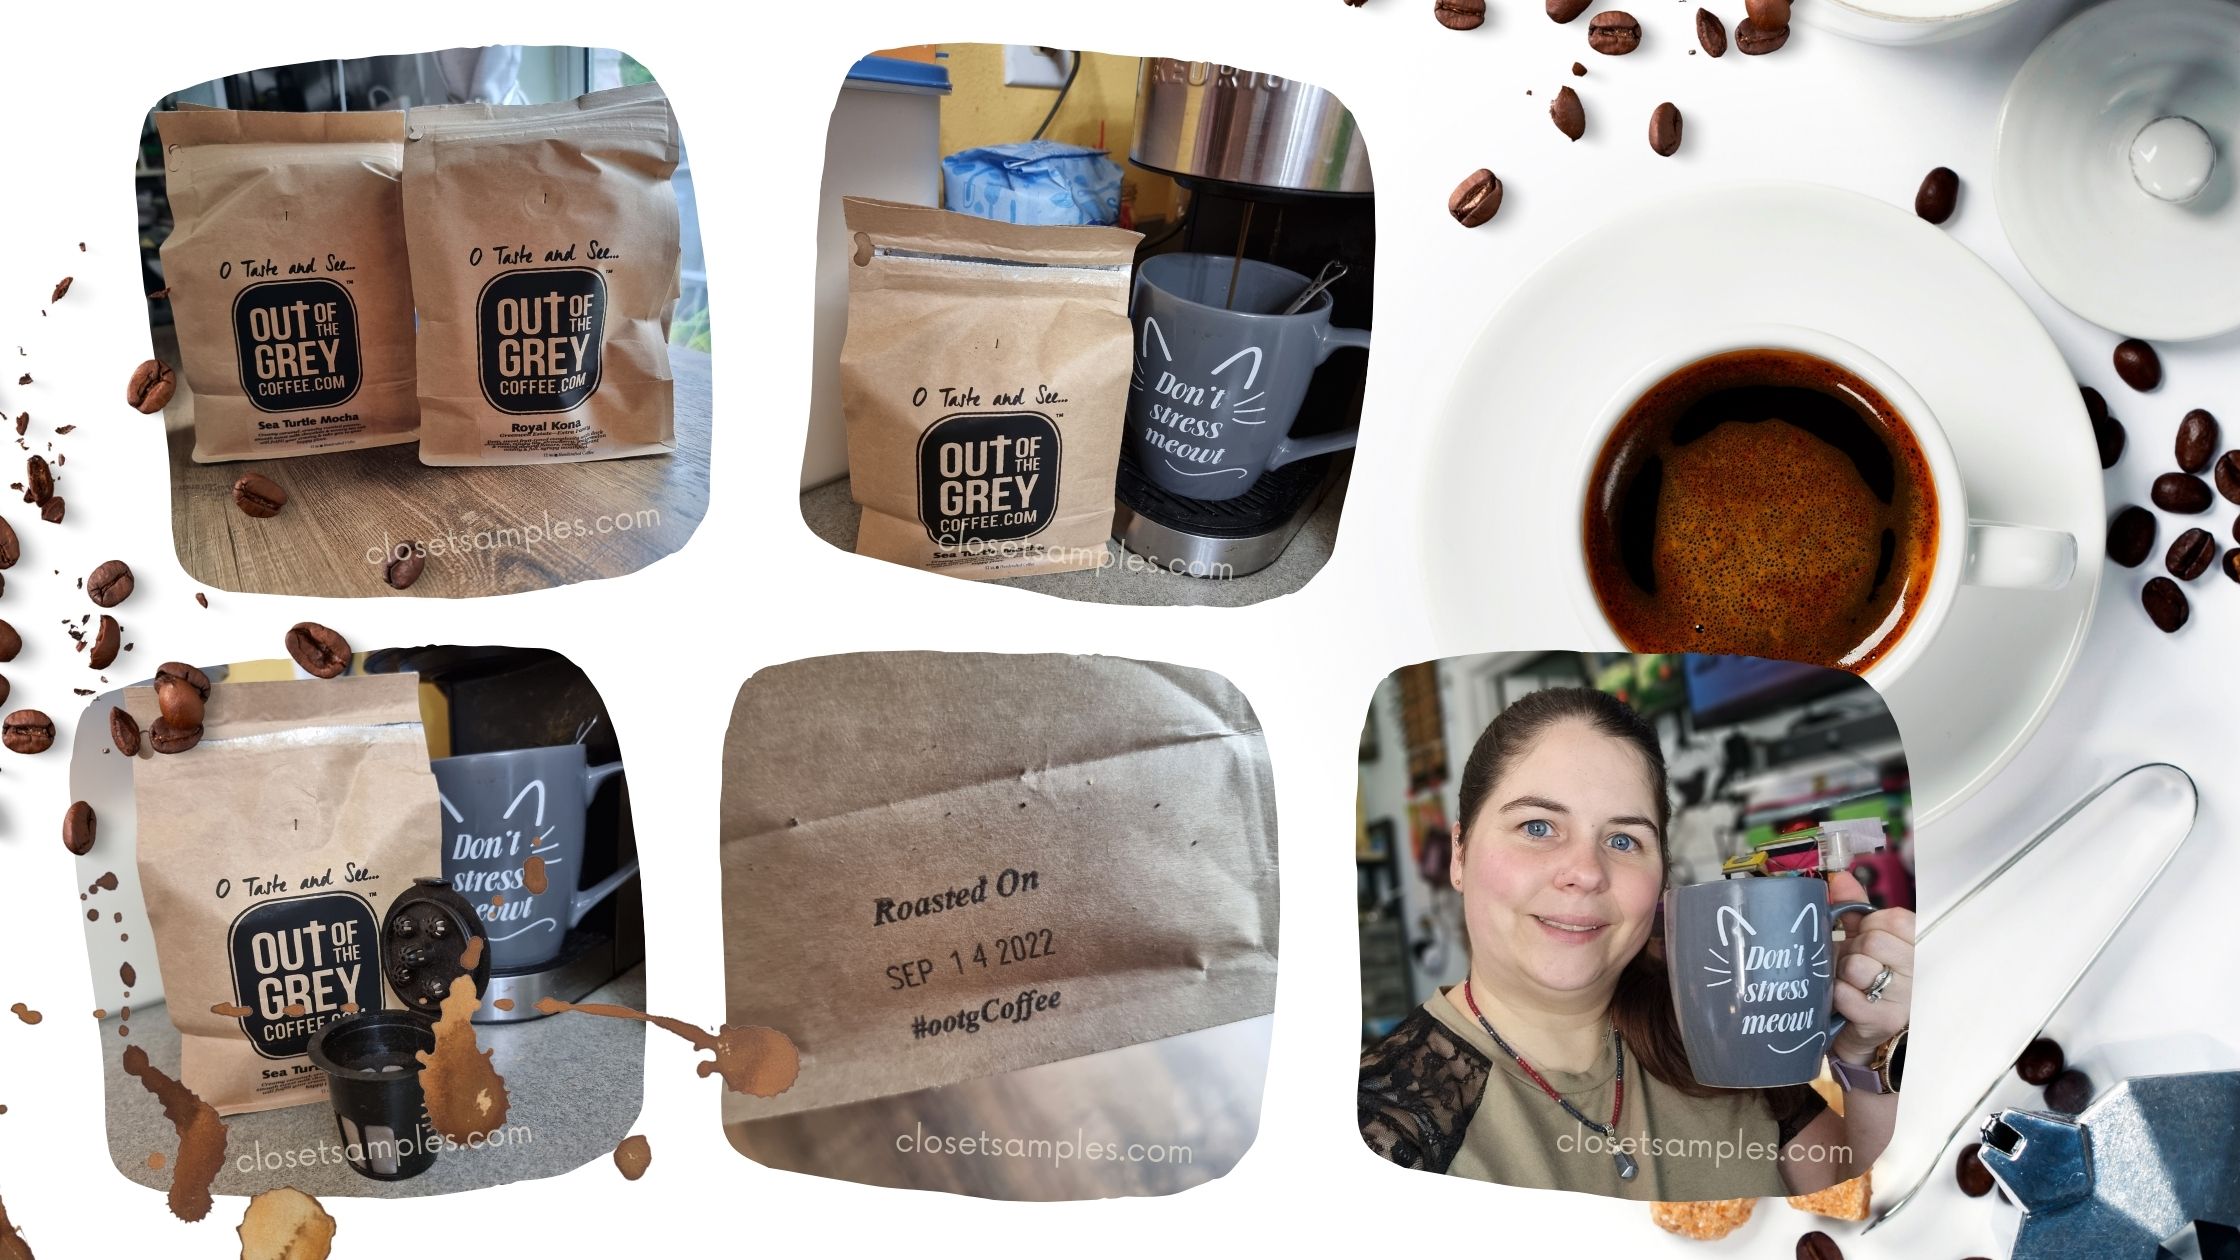 My First Time Trying Out of the Grey Coffee A Review Closetsamples 2